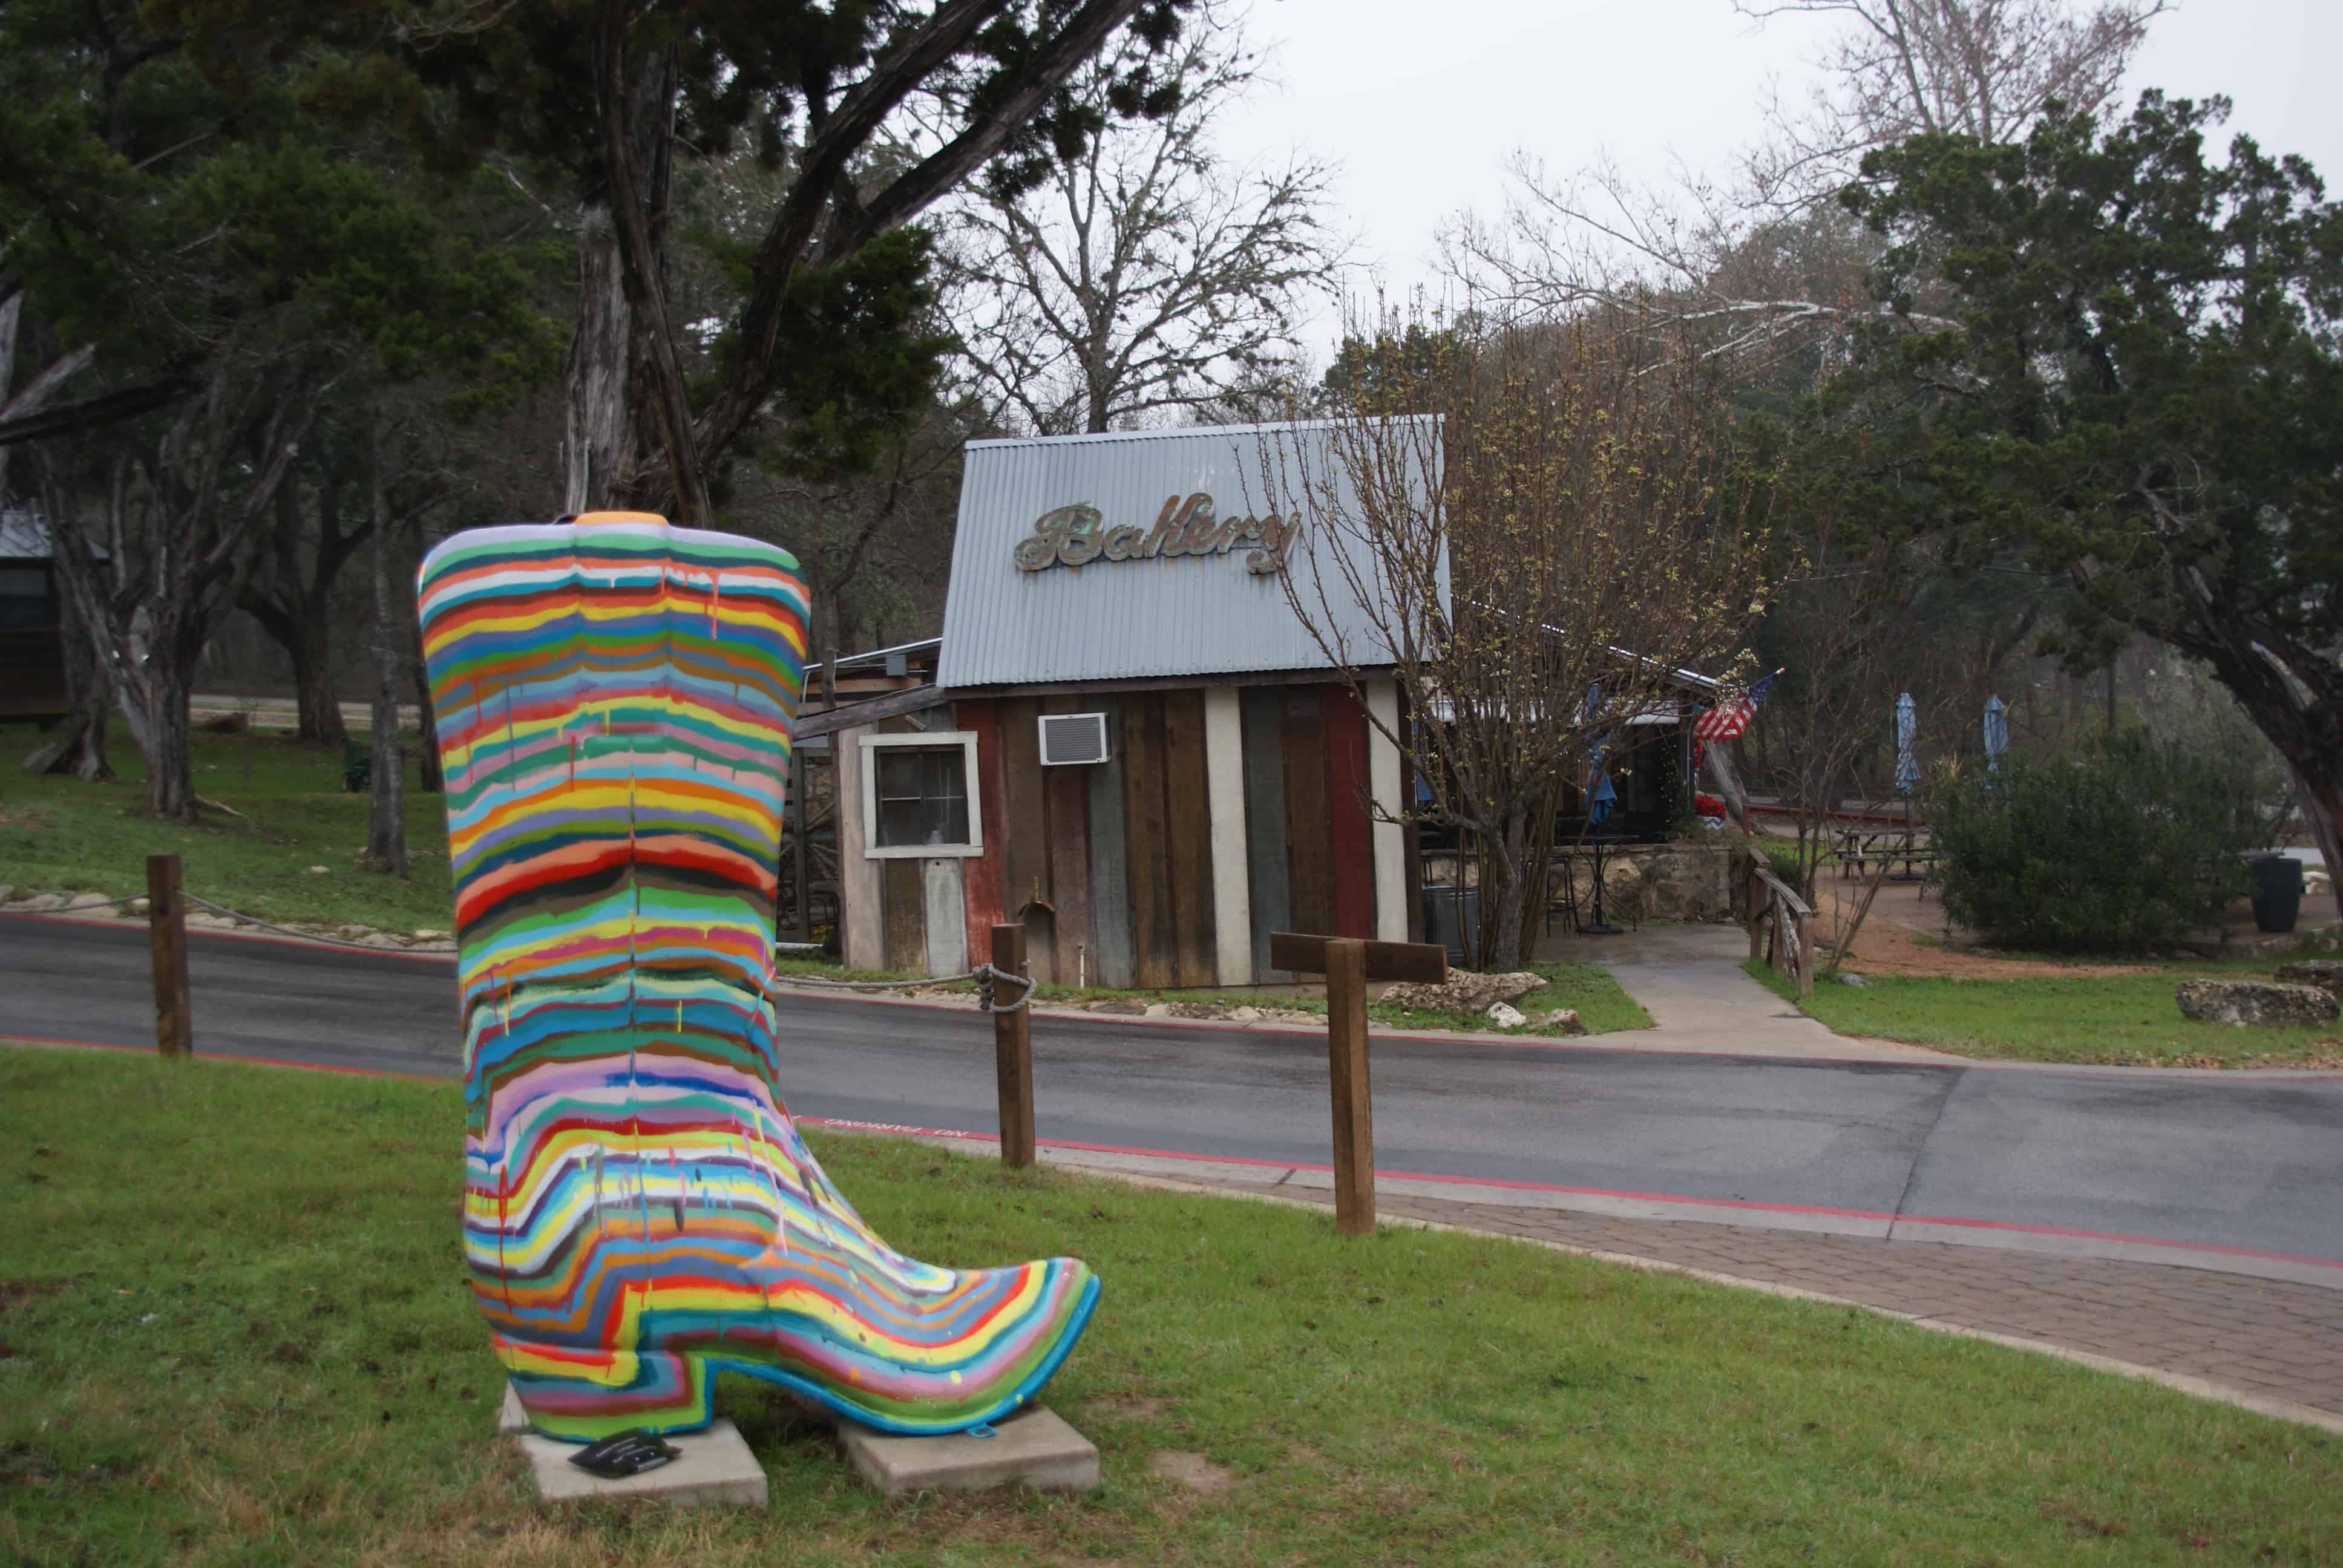 One of 50 Wimberley is Bootiful Boots